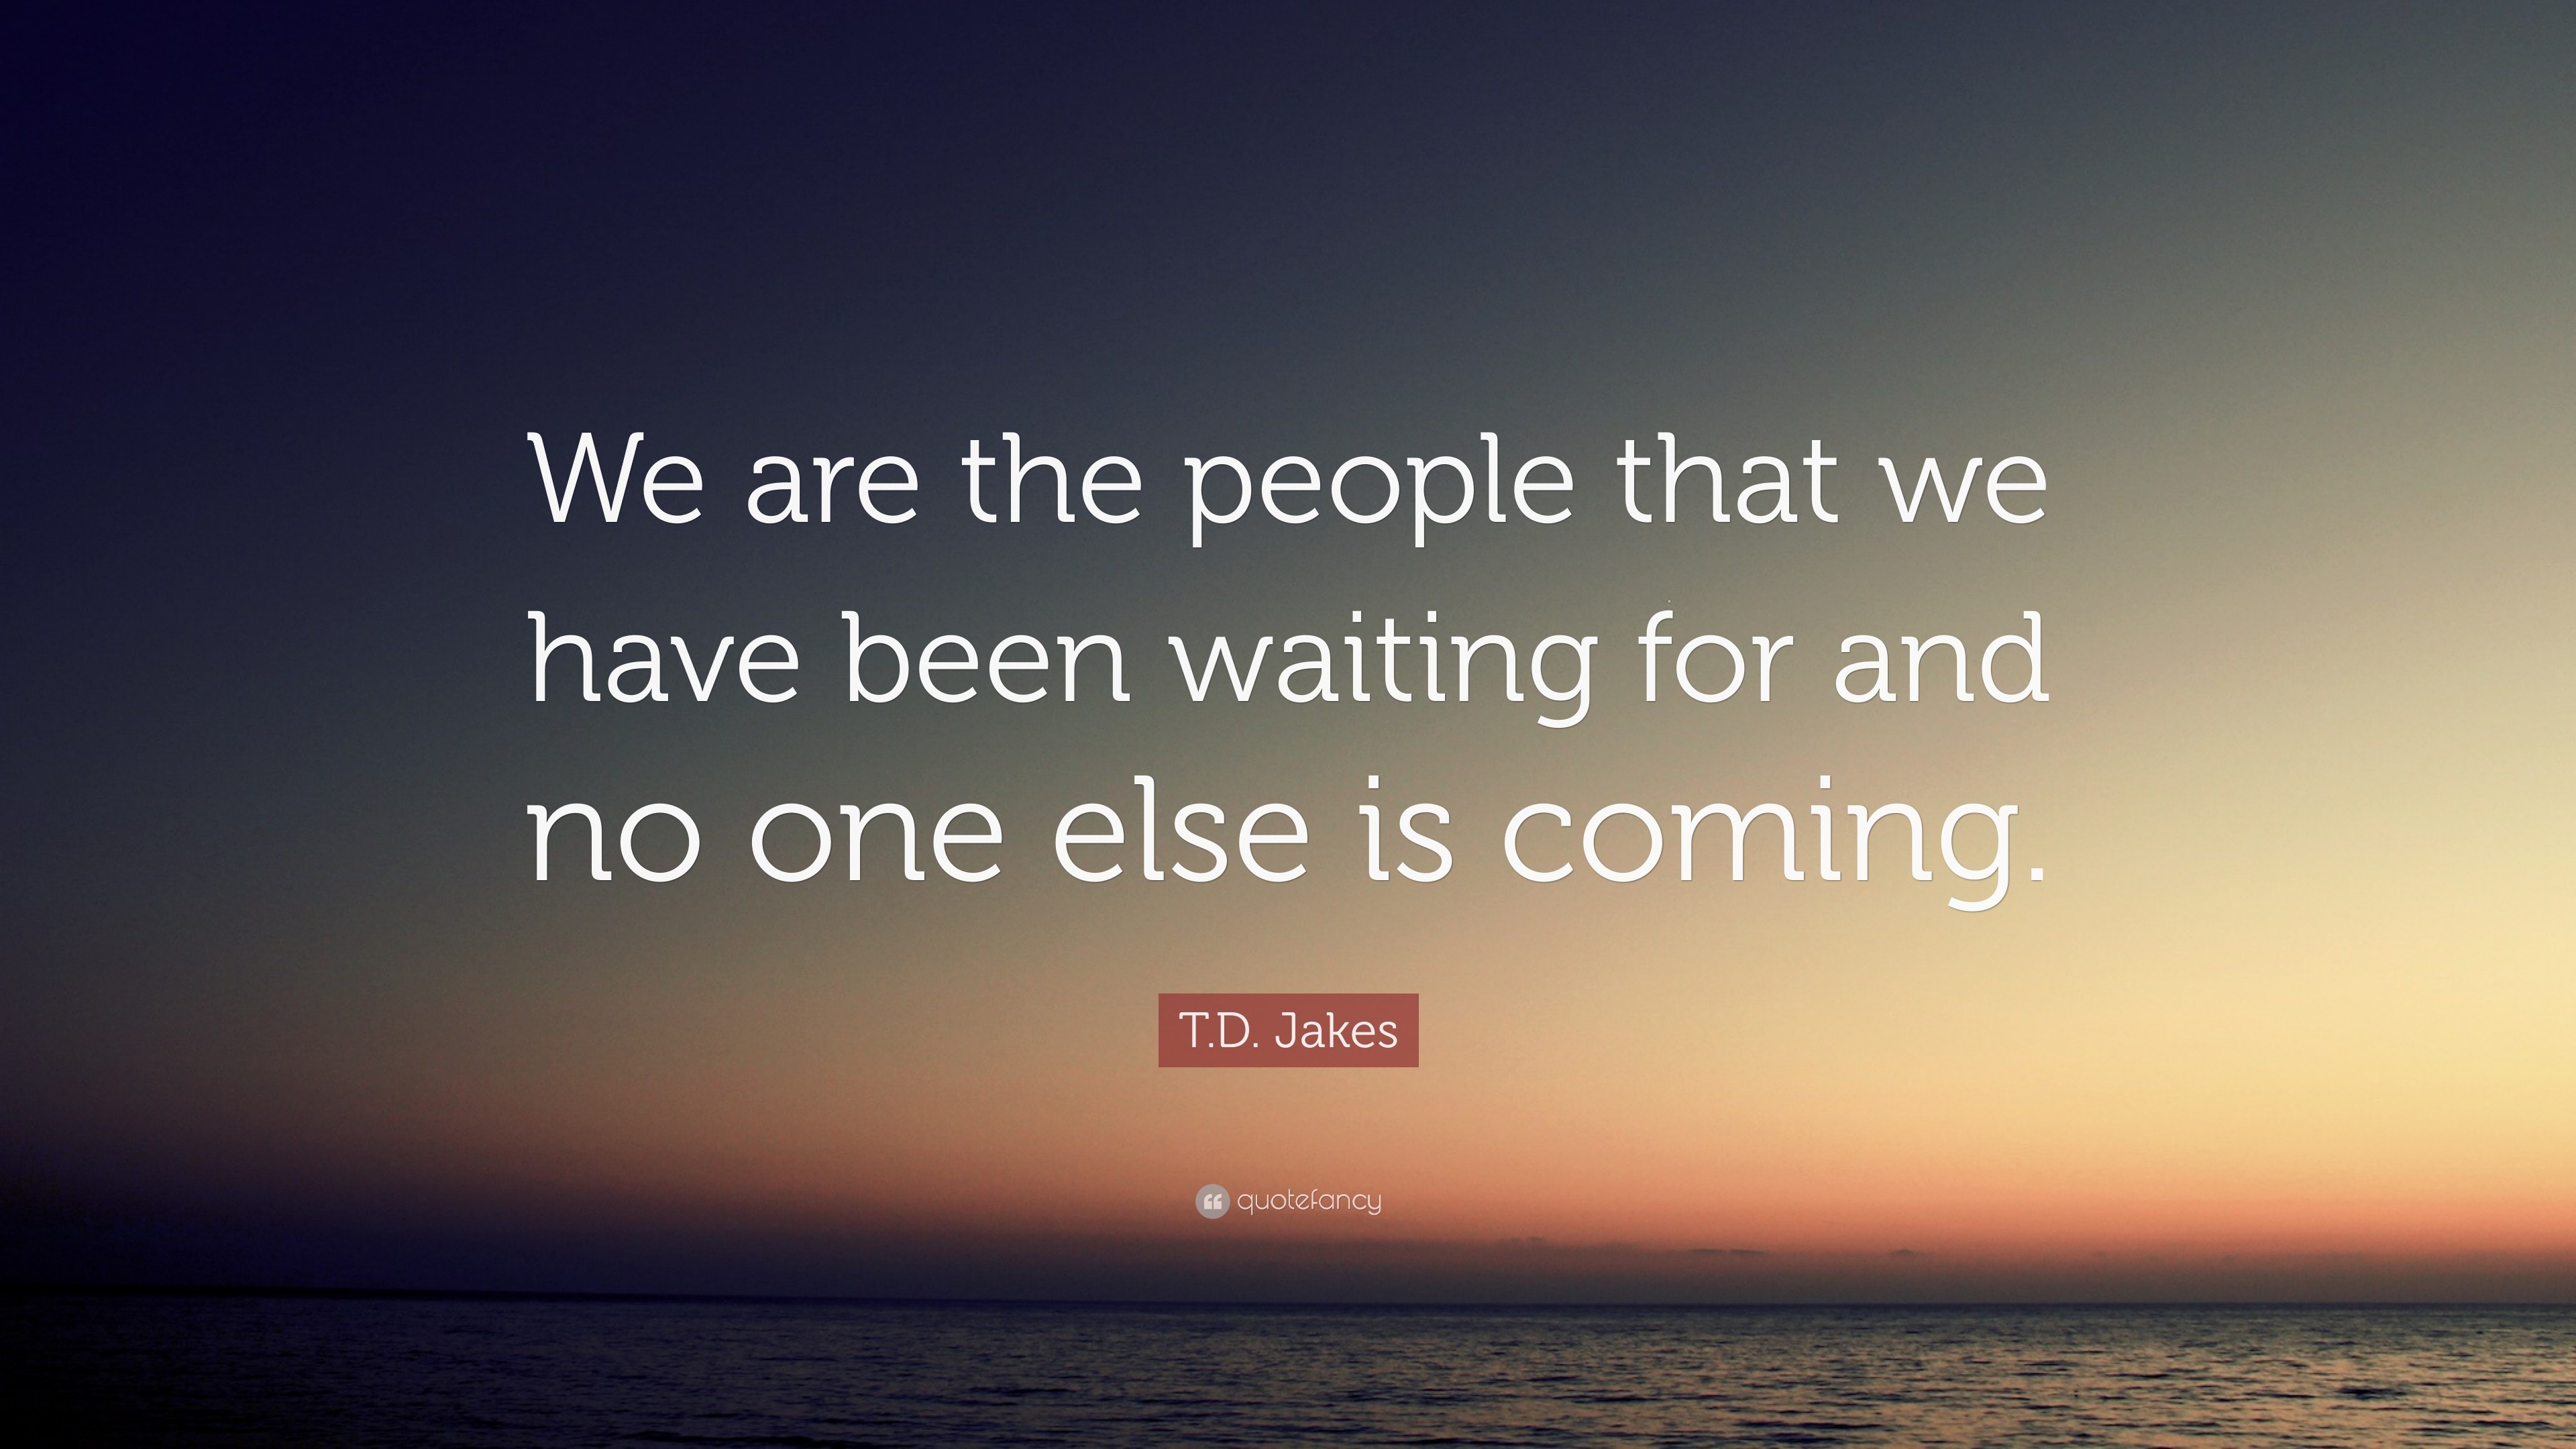 3840x2160 T.D. Jakes Quote: “We are the people that we have been waiting for and